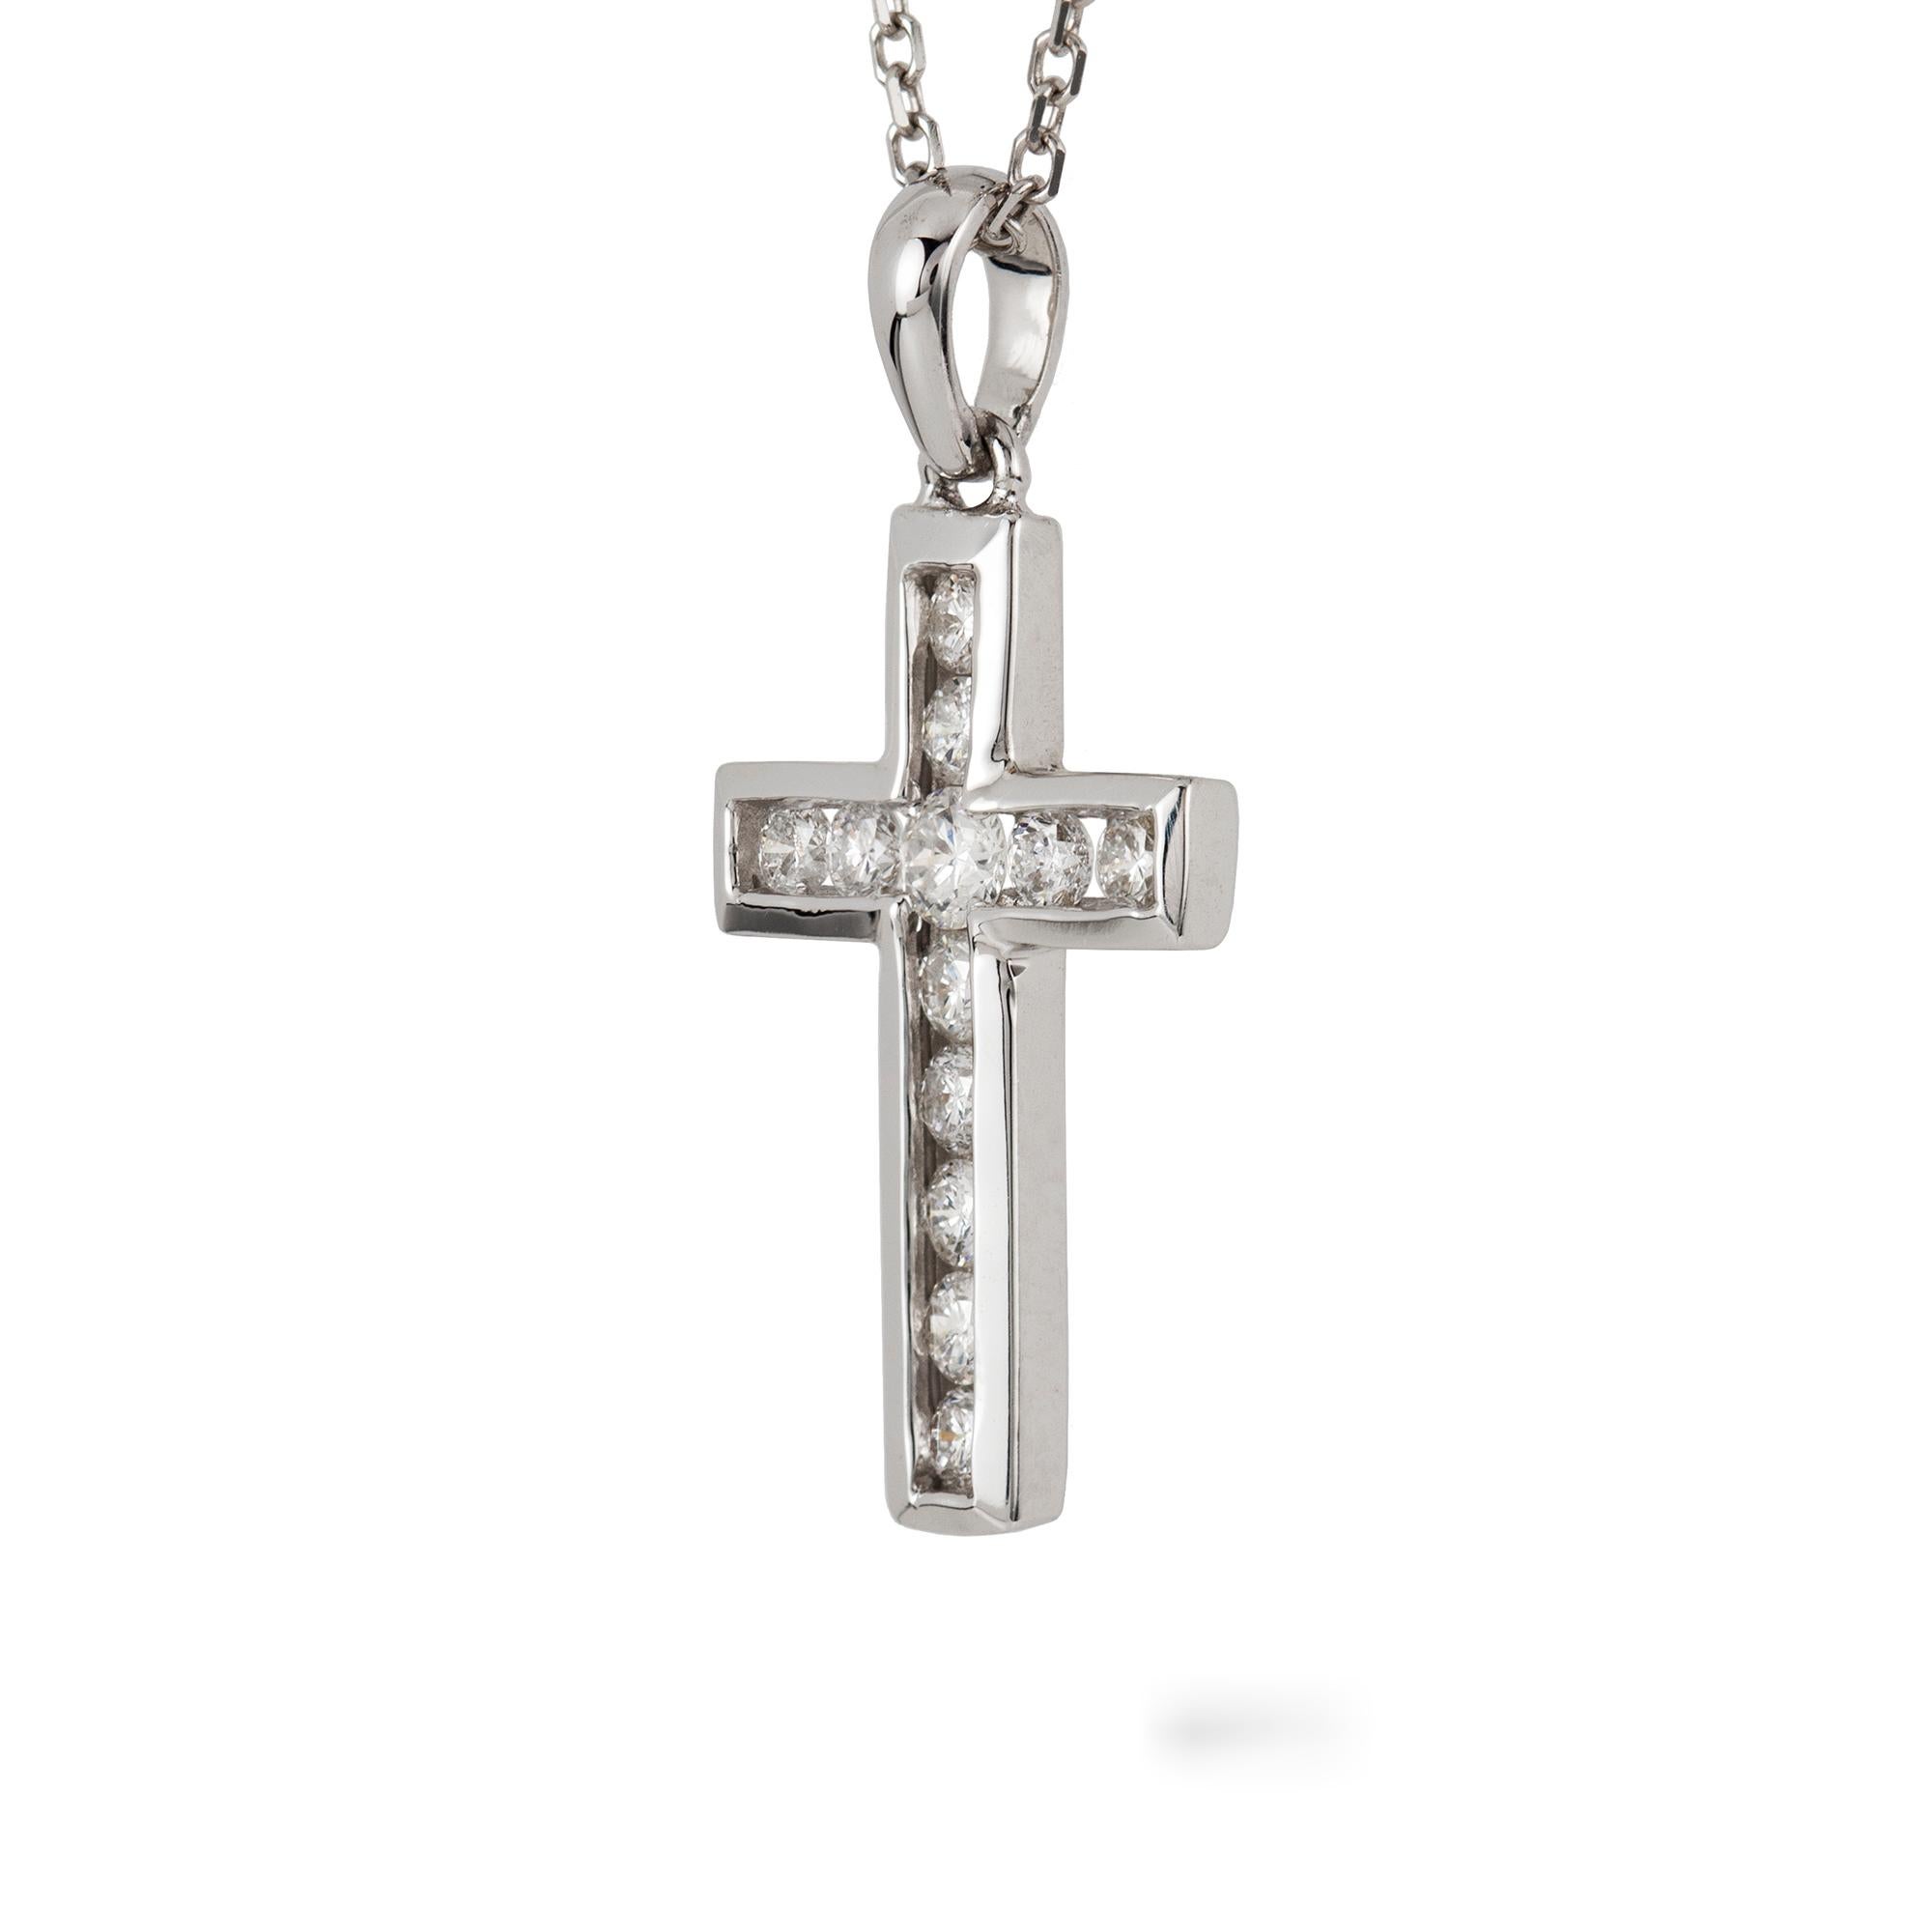 A diamond-set cross, the twelve round brilliant-cut diamonds estimated to weigh 0.5 carats, all channel-set in white gold mount with pendant loop, suspended by white gold trace chain, hallmarked 18ct gold, London 2019, the cross measuring